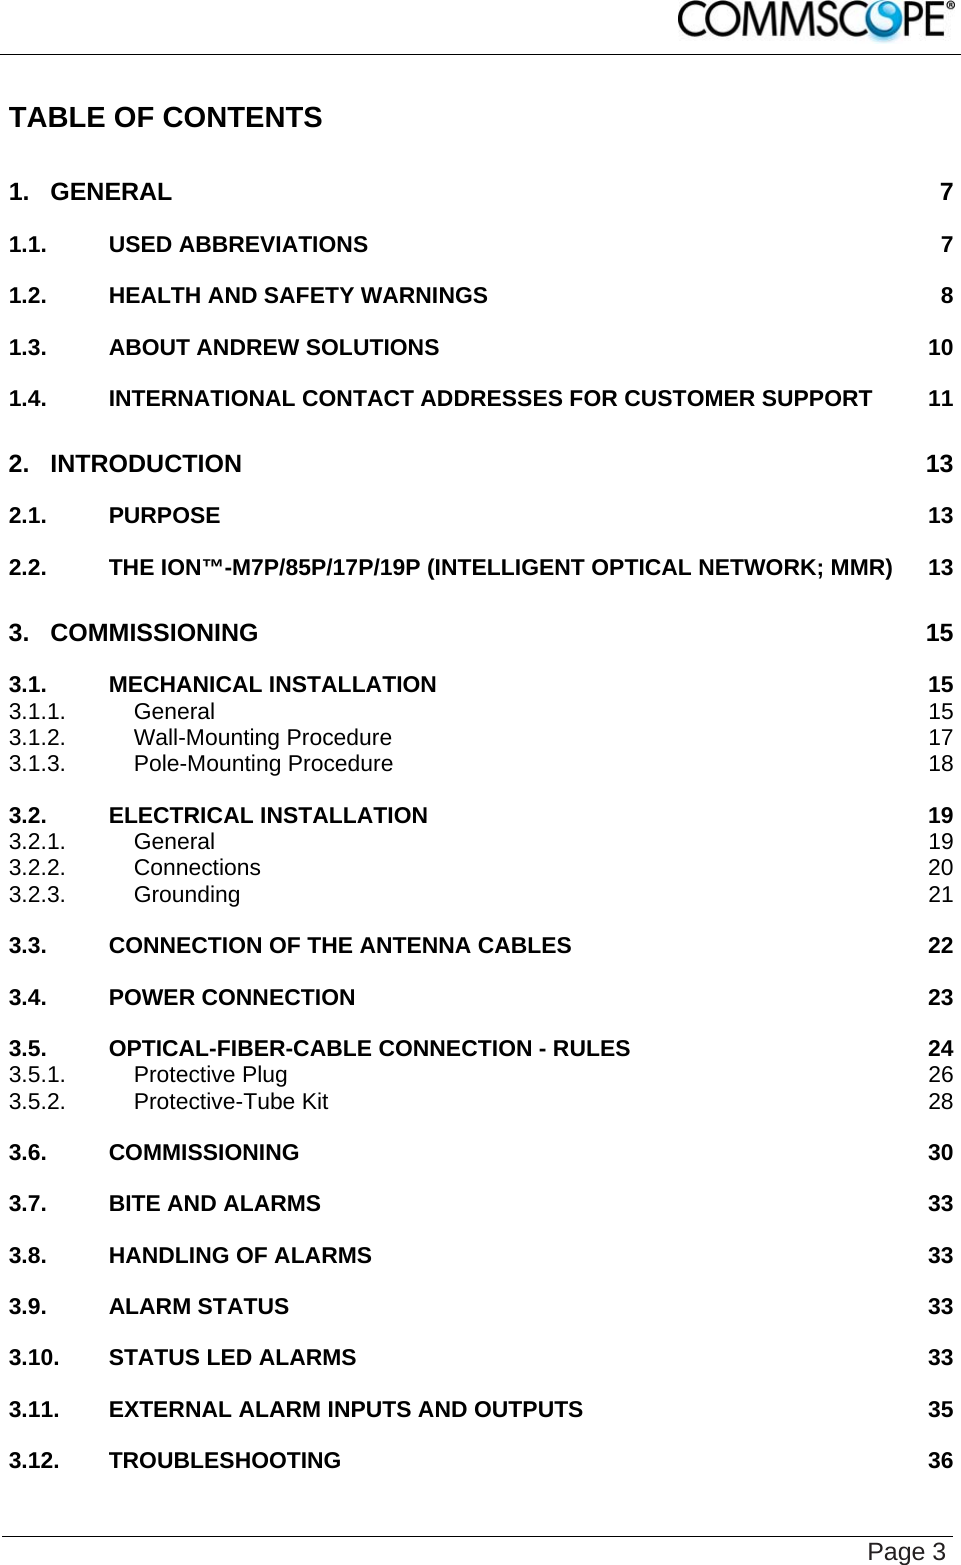    Page 3 TABLE OF CONTENTS 1. GENERAL 7 1.1. USED ABBREVIATIONS 7 1.2. HEALTH AND SAFETY WARNINGS 8 1.3. ABOUT ANDREW SOLUTIONS 10 1.4. INTERNATIONAL CONTACT ADDRESSES FOR CUSTOMER SUPPORT 11 2. INTRODUCTION 13 2.1. PURPOSE 13 2.2. THE ION™-M7P/85P/17P/19P (INTELLIGENT OPTICAL NETWORK; MMR) 13 3. COMMISSIONING 15 3.1. MECHANICAL INSTALLATION 15 3.1.1. General 15 3.1.2. Wall-Mounting Procedure 17 3.1.3. Pole-Mounting Procedure 18 3.2. ELECTRICAL INSTALLATION 19 3.2.1. General 19 3.2.2. Connections 20 3.2.3. Grounding 21 3.3. CONNECTION OF THE ANTENNA CABLES 22 3.4. POWER CONNECTION 23 3.5. OPTICAL-FIBER-CABLE CONNECTION - RULES 24 3.5.1. Protective Plug 26 3.5.2. Protective-Tube Kit 28 3.6. COMMISSIONING 30 3.7. BITE AND ALARMS 33 3.8. HANDLING OF ALARMS 33 3.9. ALARM STATUS 33 3.10. STATUS LED ALARMS 33 3.11. EXTERNAL ALARM INPUTS AND OUTPUTS 35 3.12. TROUBLESHOOTING 36 